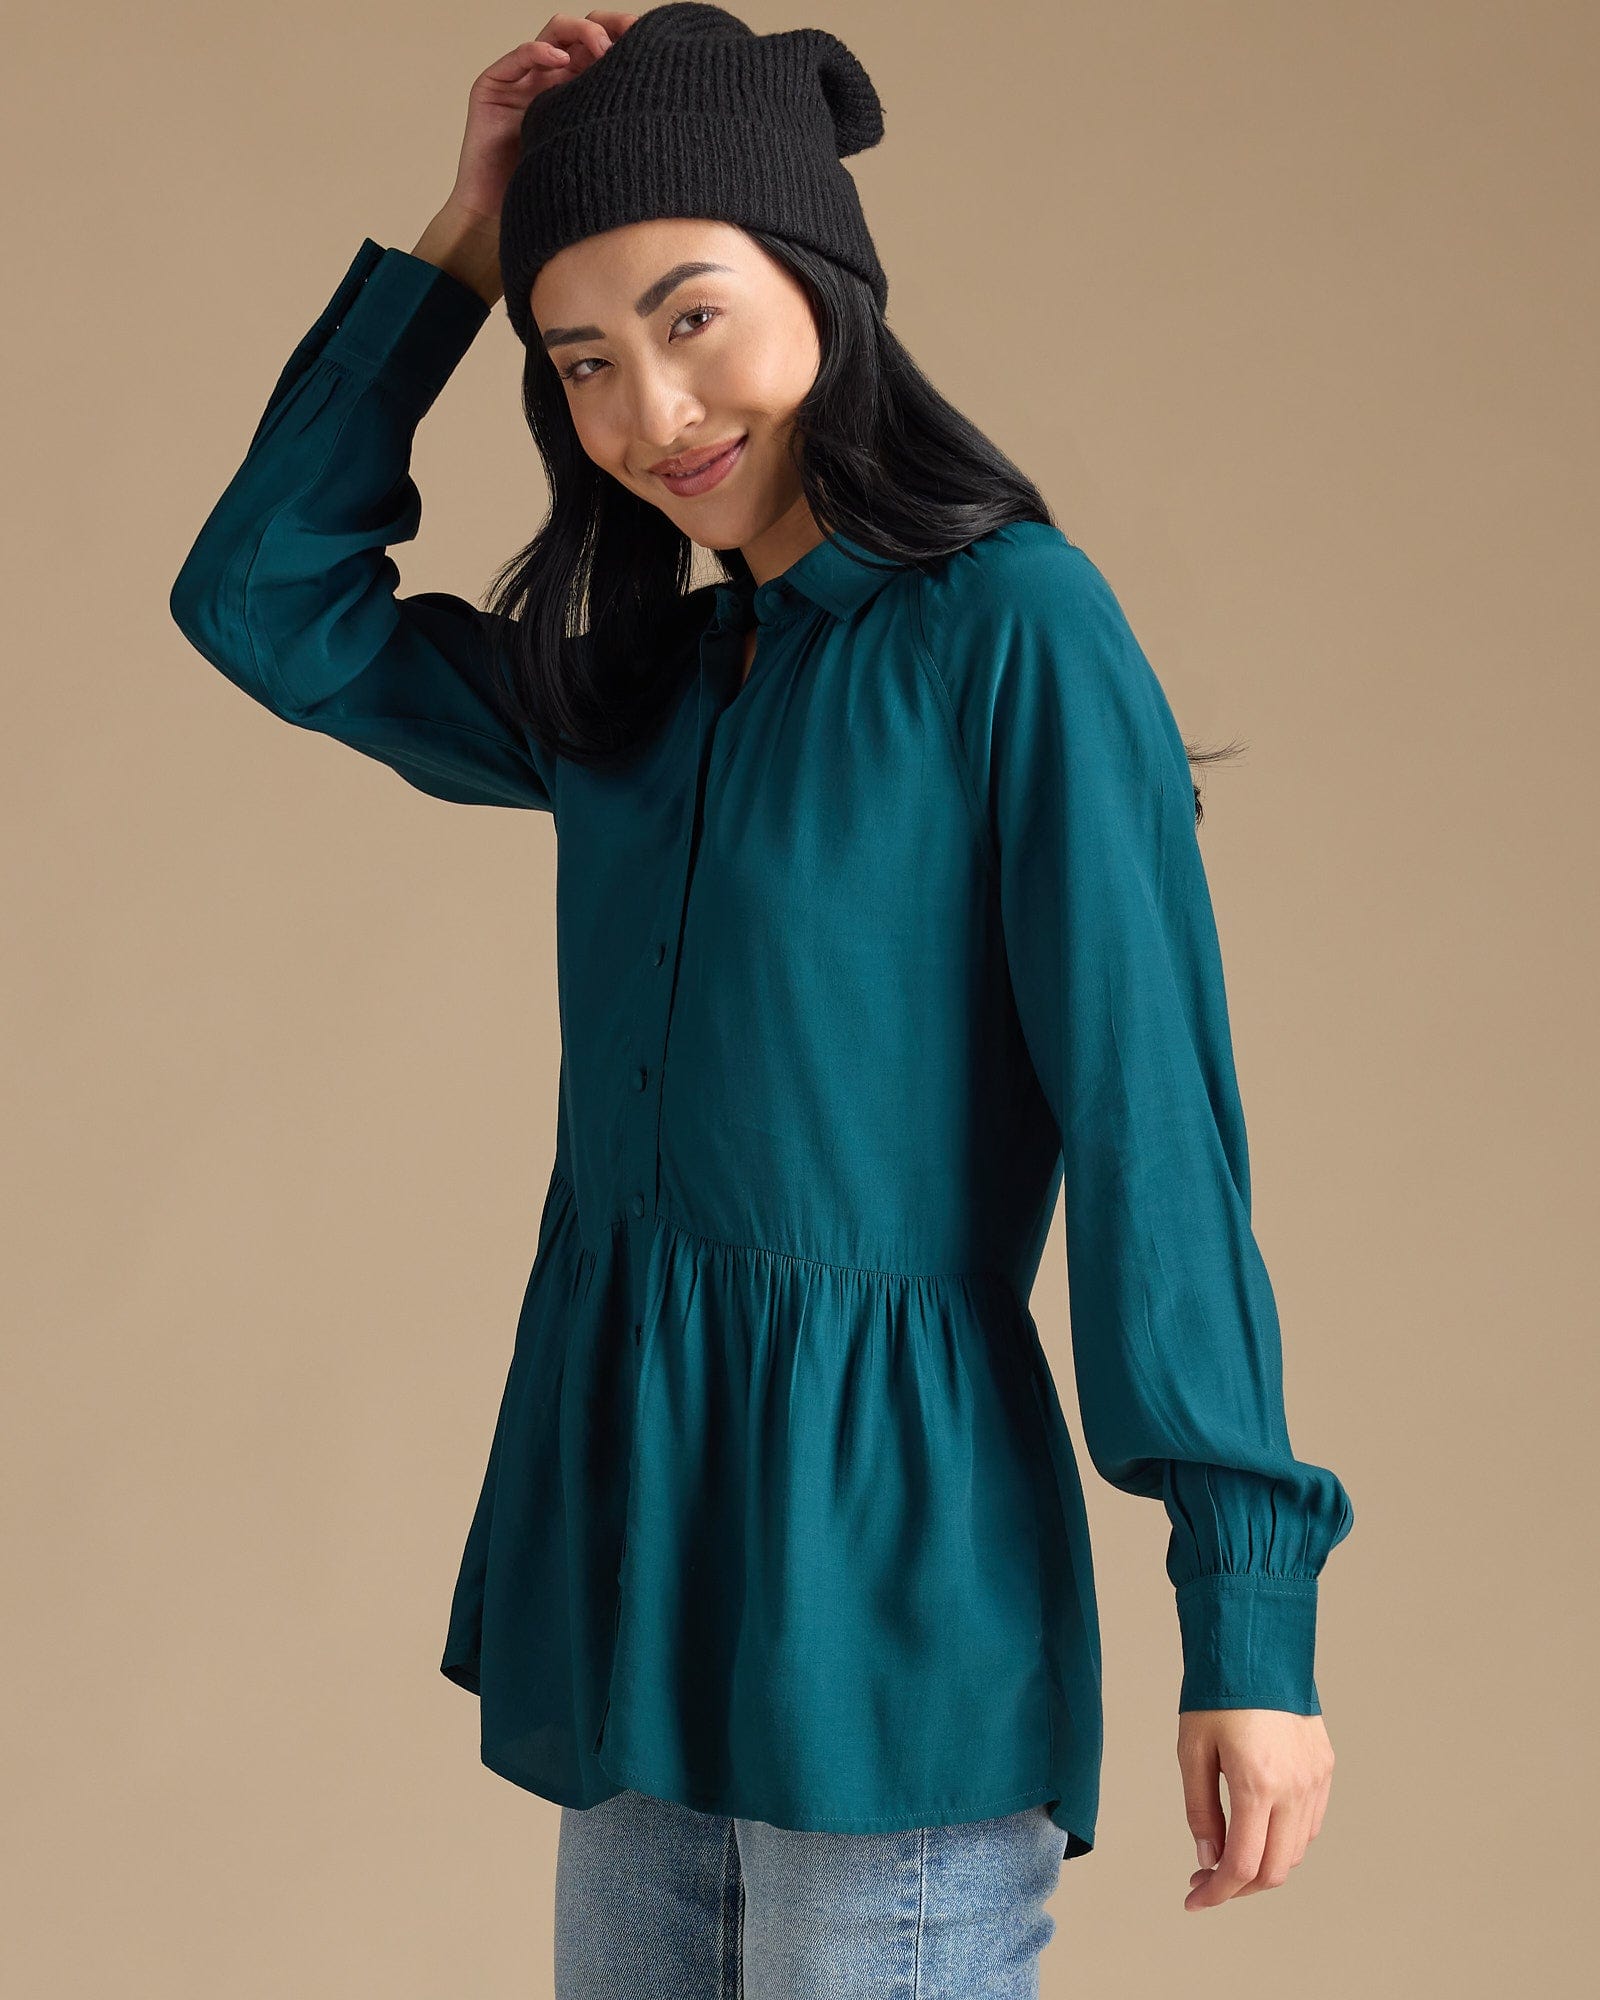 Woman in a teal button-down peplum top